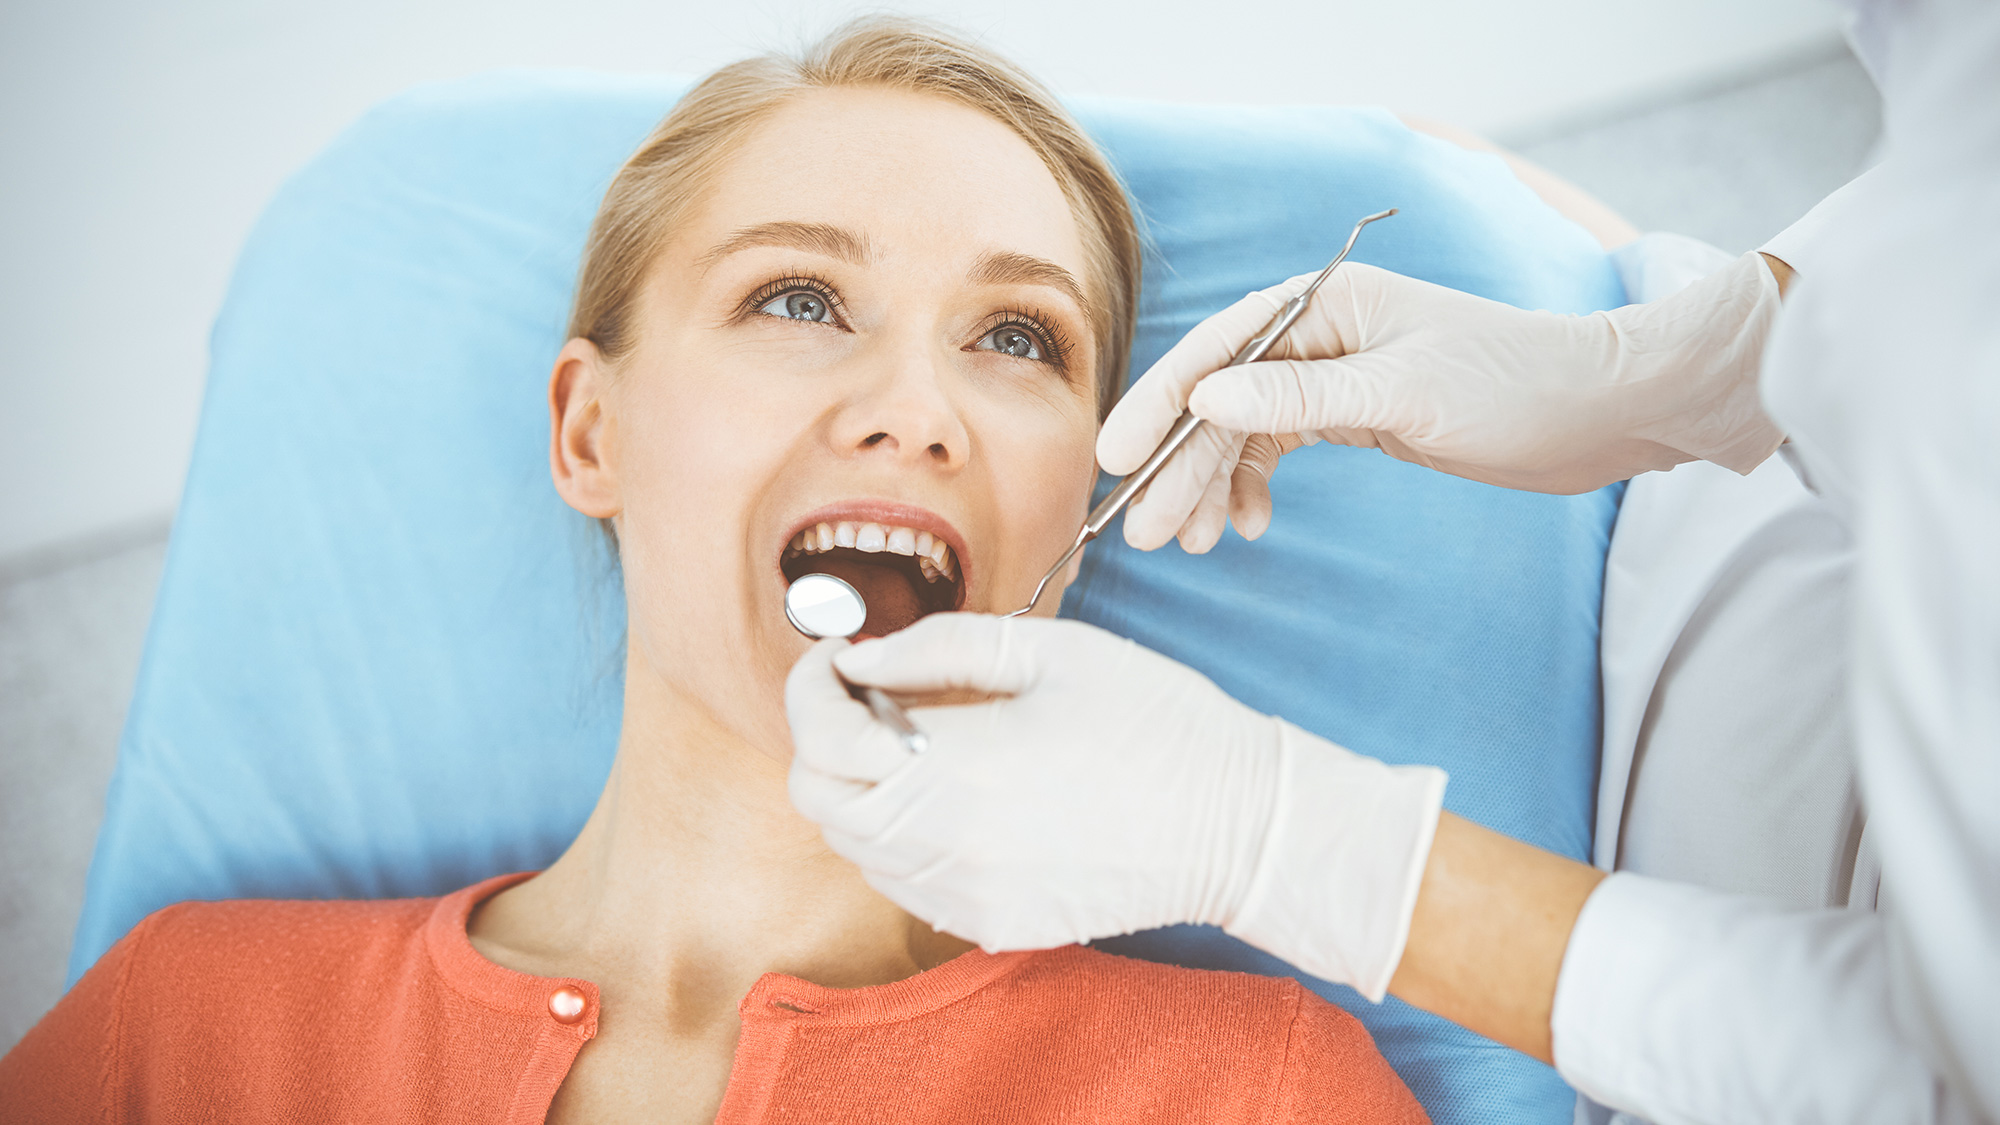 Oral Cancer Screening in Chester, NJ